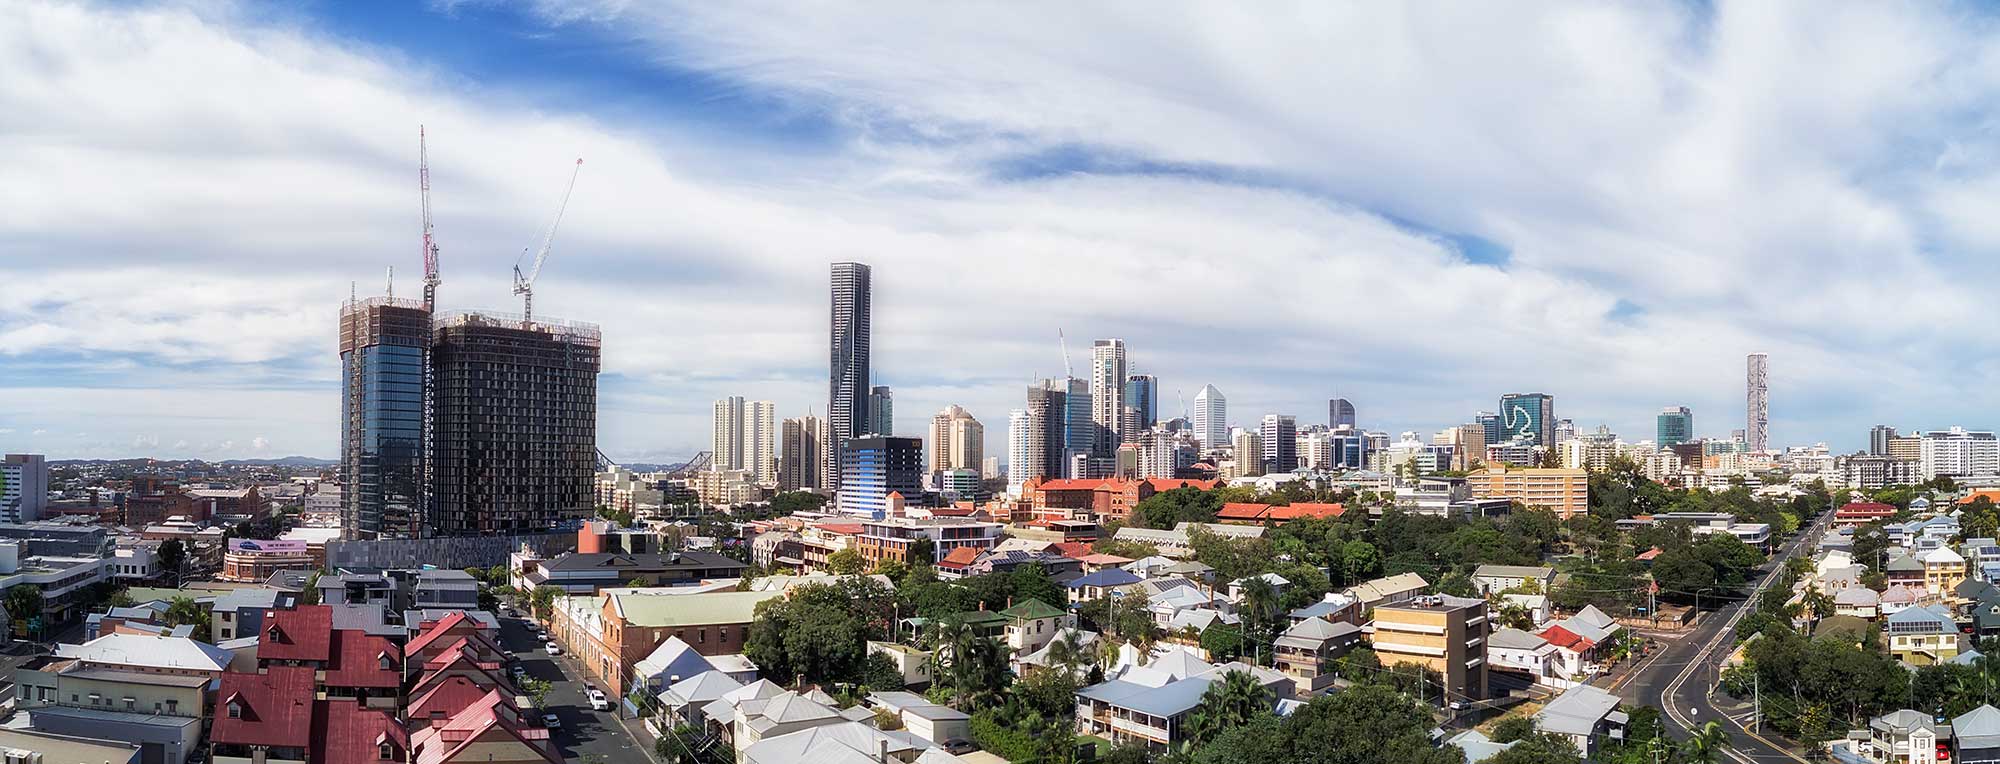 aerial drone photography of Brisbane CBD from Chinatown - DroneAce Drone photography April 2017 